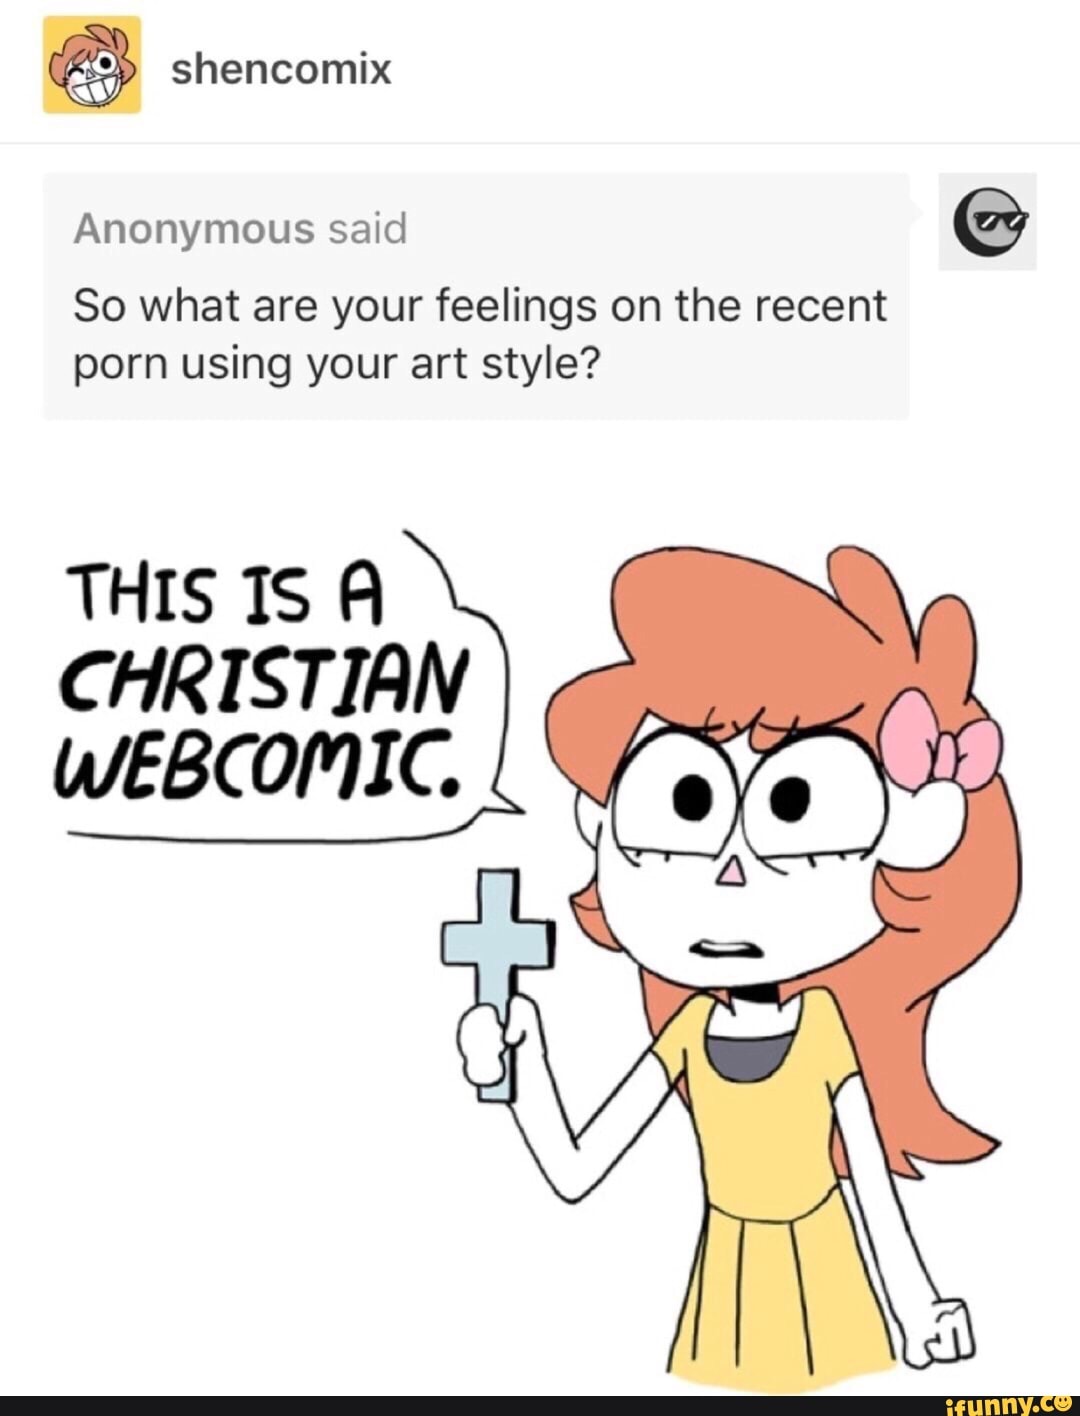 & shencomix Anonymous said So what are your feelings on the recent porn using your art st...